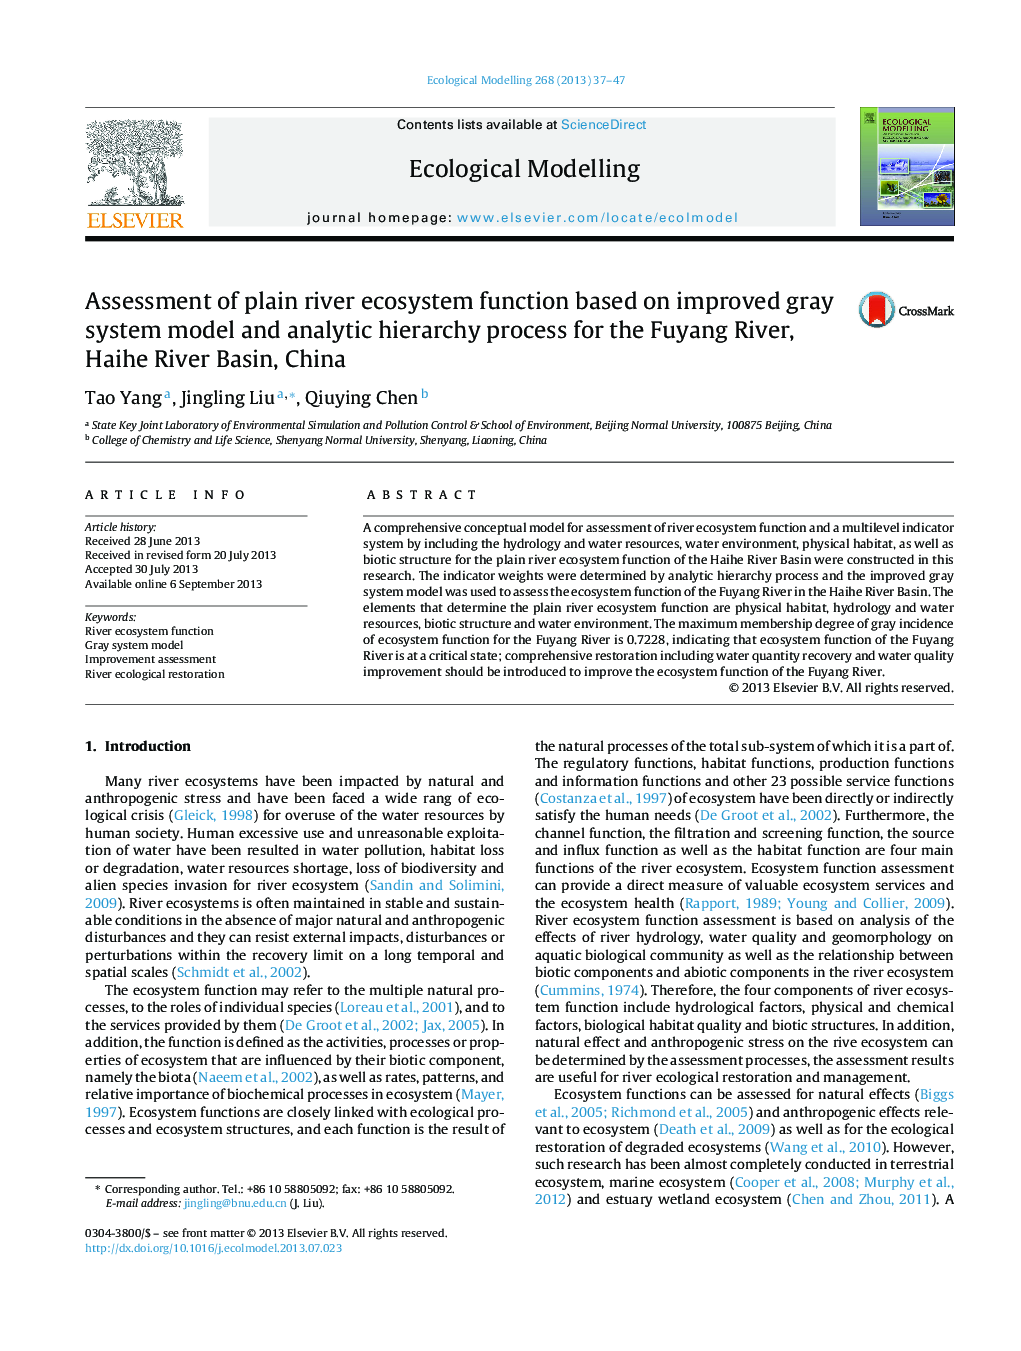 Assessment of plain river ecosystem function based on improved gray system model and analytic hierarchy process for the Fuyang River, Haihe River Basin, China